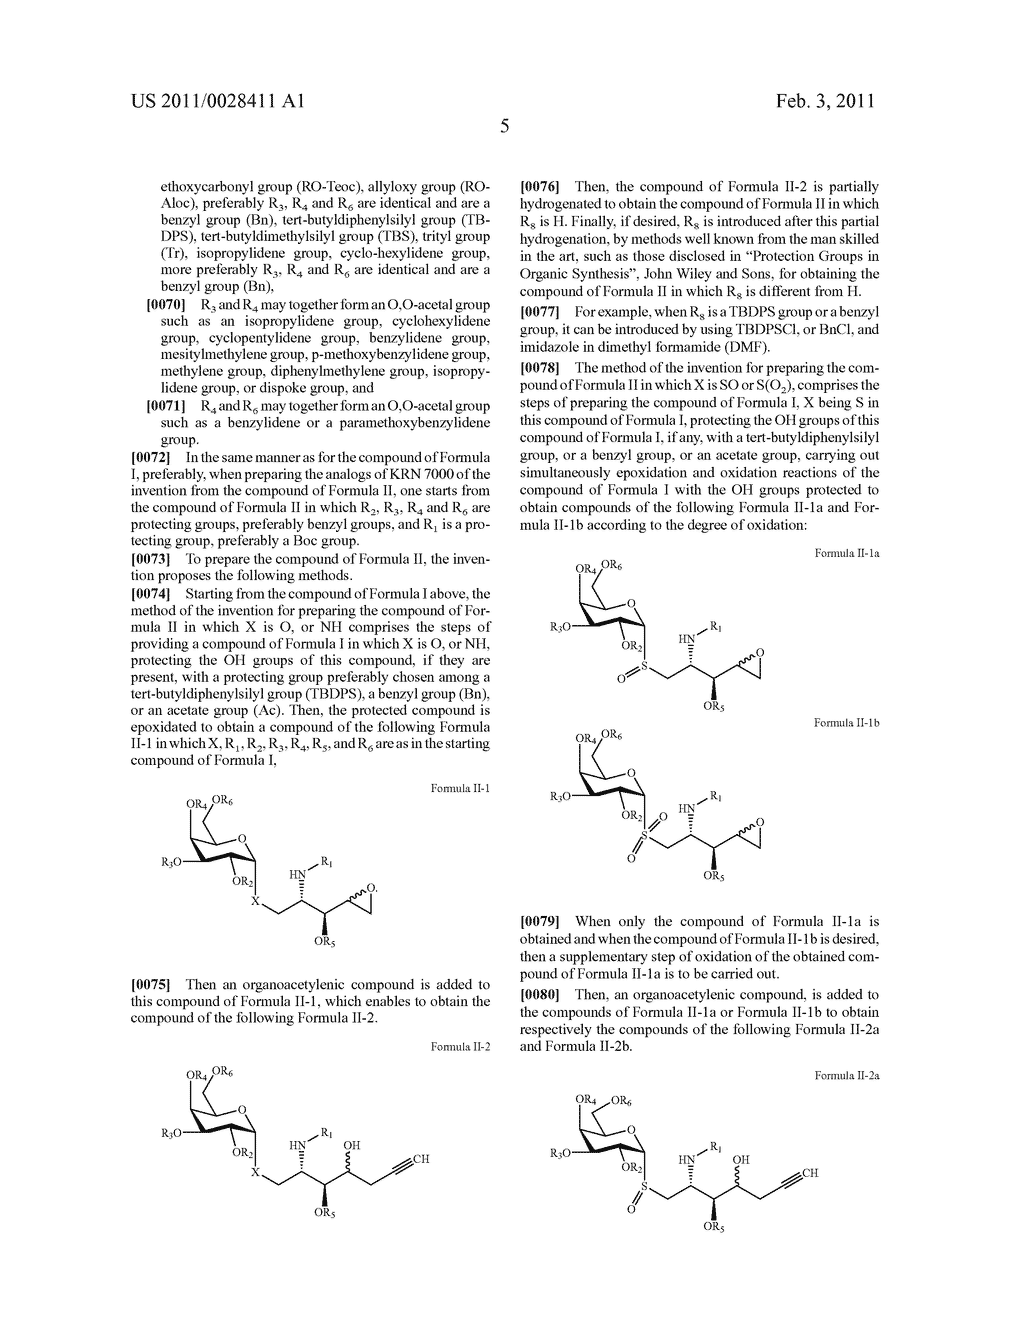 ALPHA-GALACTOCERAMIDE ANALOGS, THEIR METHODS OF MANUFACTURE, INTERMEDIATE COMPOUNDS USEFUL IN THESE METHODS, AND PHARMACEUTICAL COMPOSITIONS CONTAINING THEM - diagram, schematic, and image 12